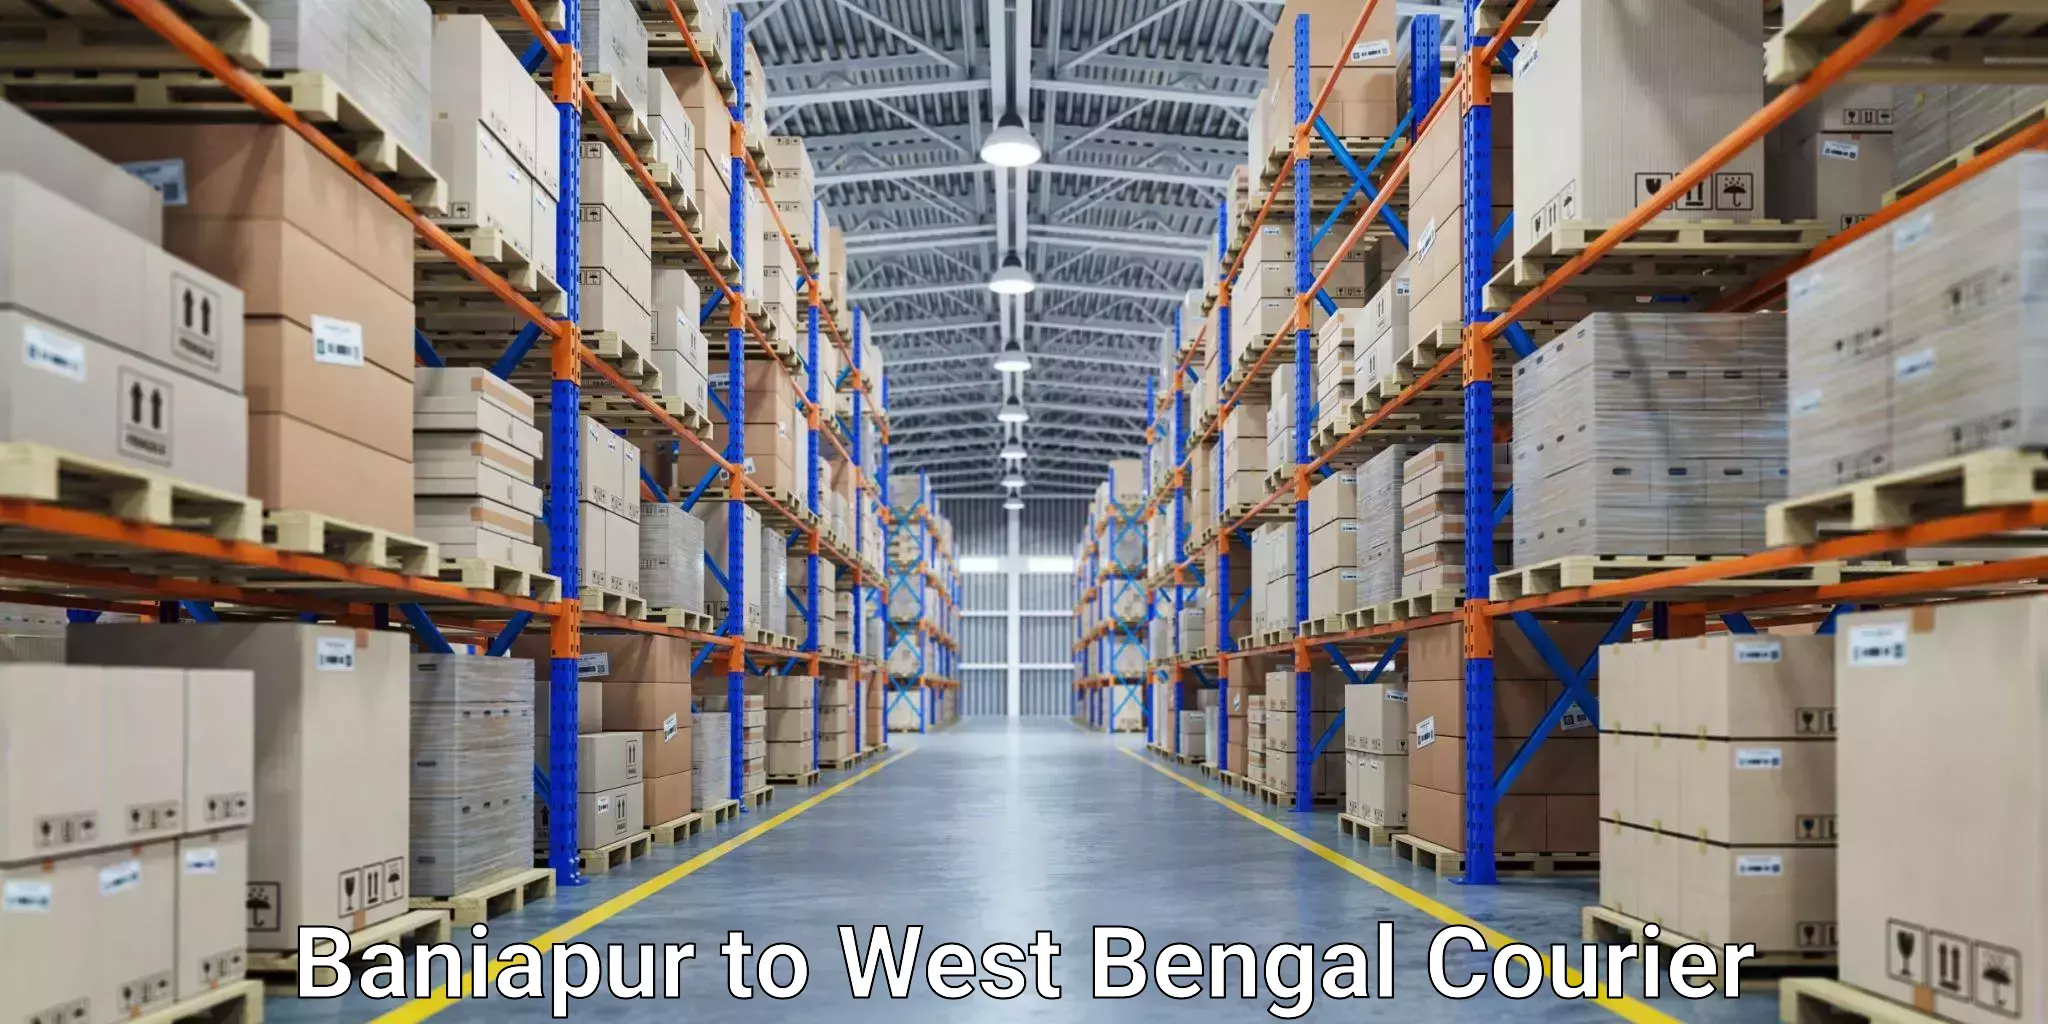 Express delivery solutions in Baniapur to Memari